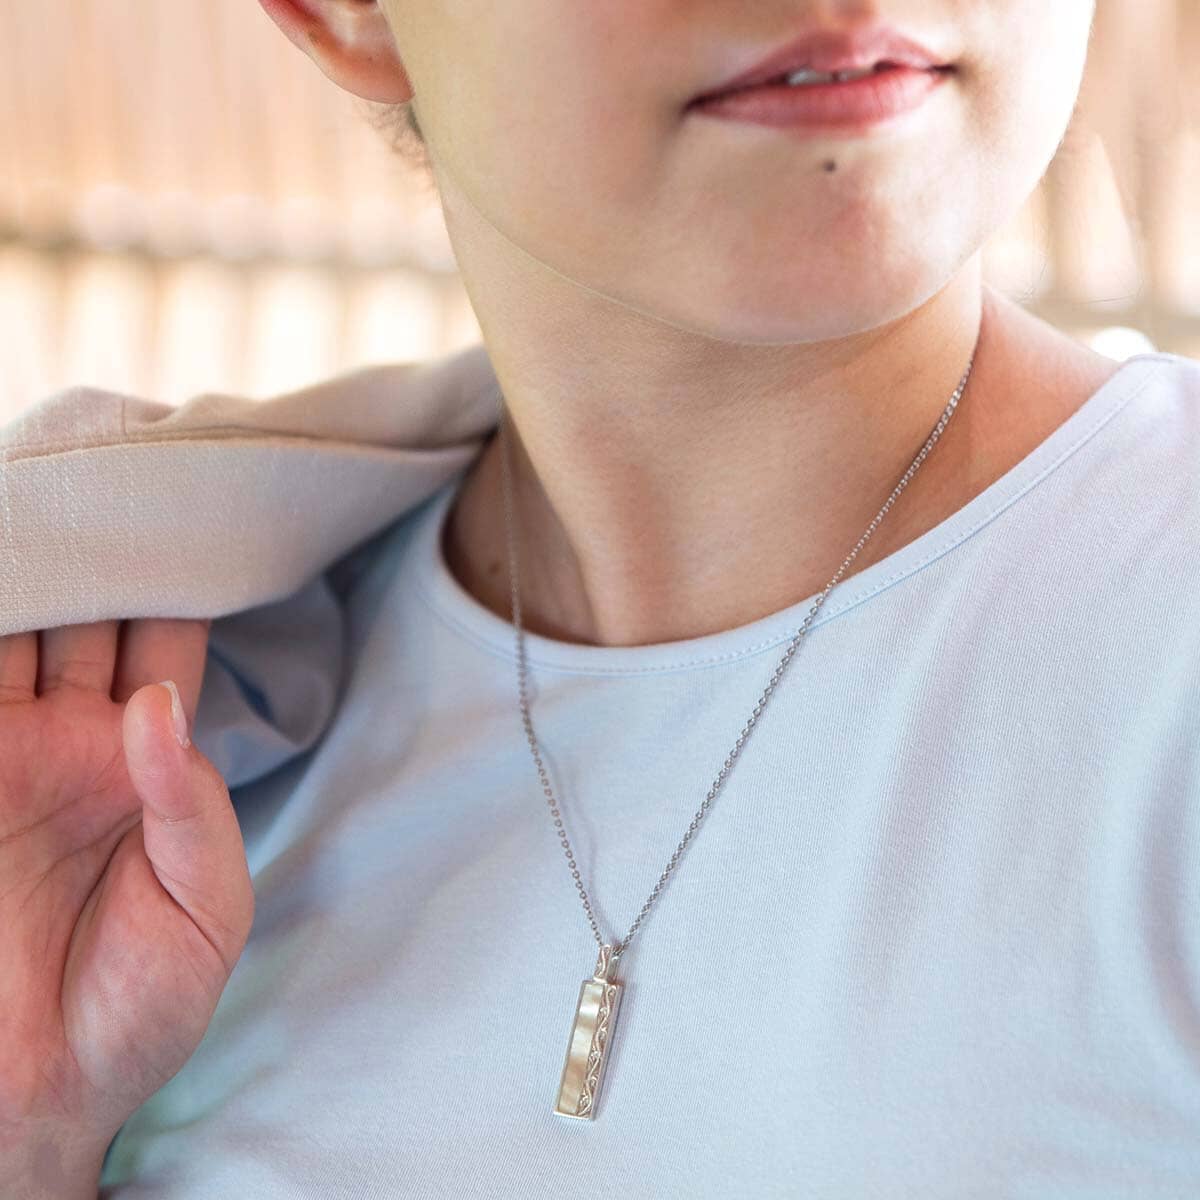 Effortlessly Chic: Our Favorite Ways to Style Mother of Pearl Jewelry